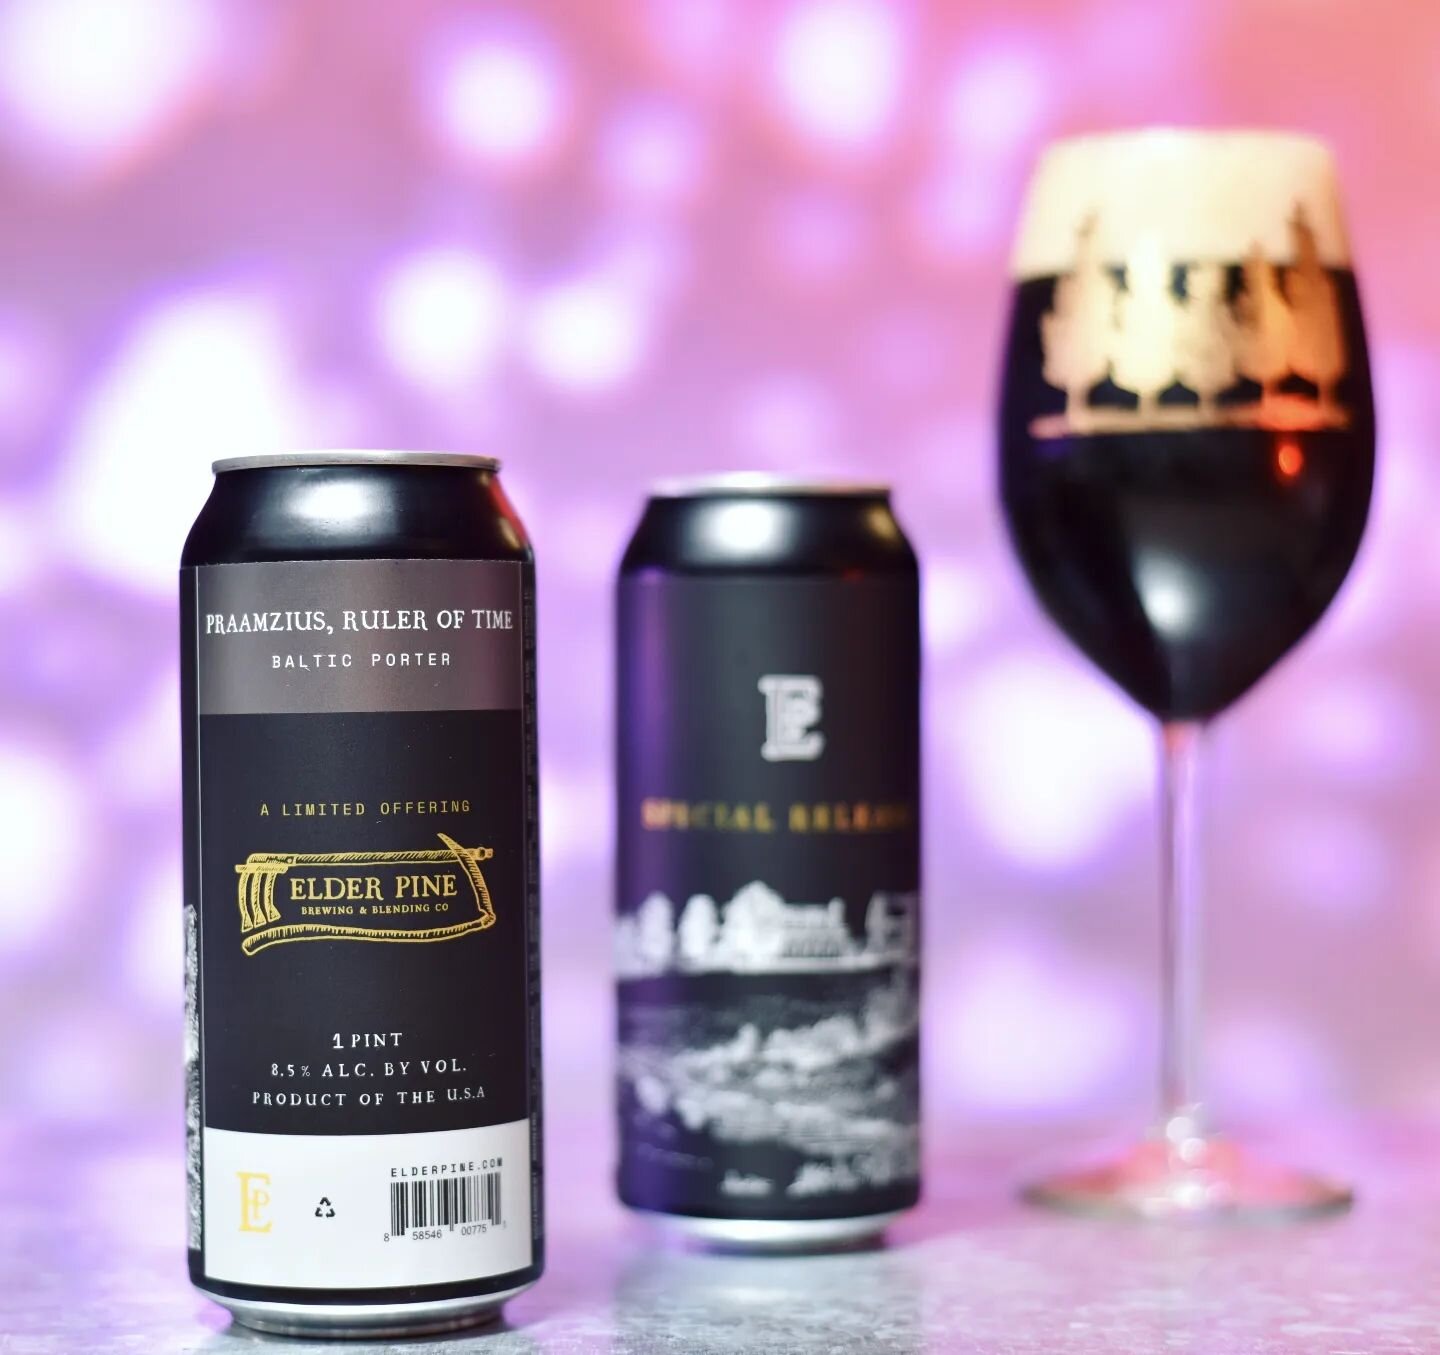 PRAAMZIUS, RULER OF TIME
Baltic Porter
8.5% abv

Baltic Porter is often a misunderstood style of beer in the US so we set out to create a truly authentic representation of the style. Praamzius, Ruler of Time is brewed with the finest brown, chocolate